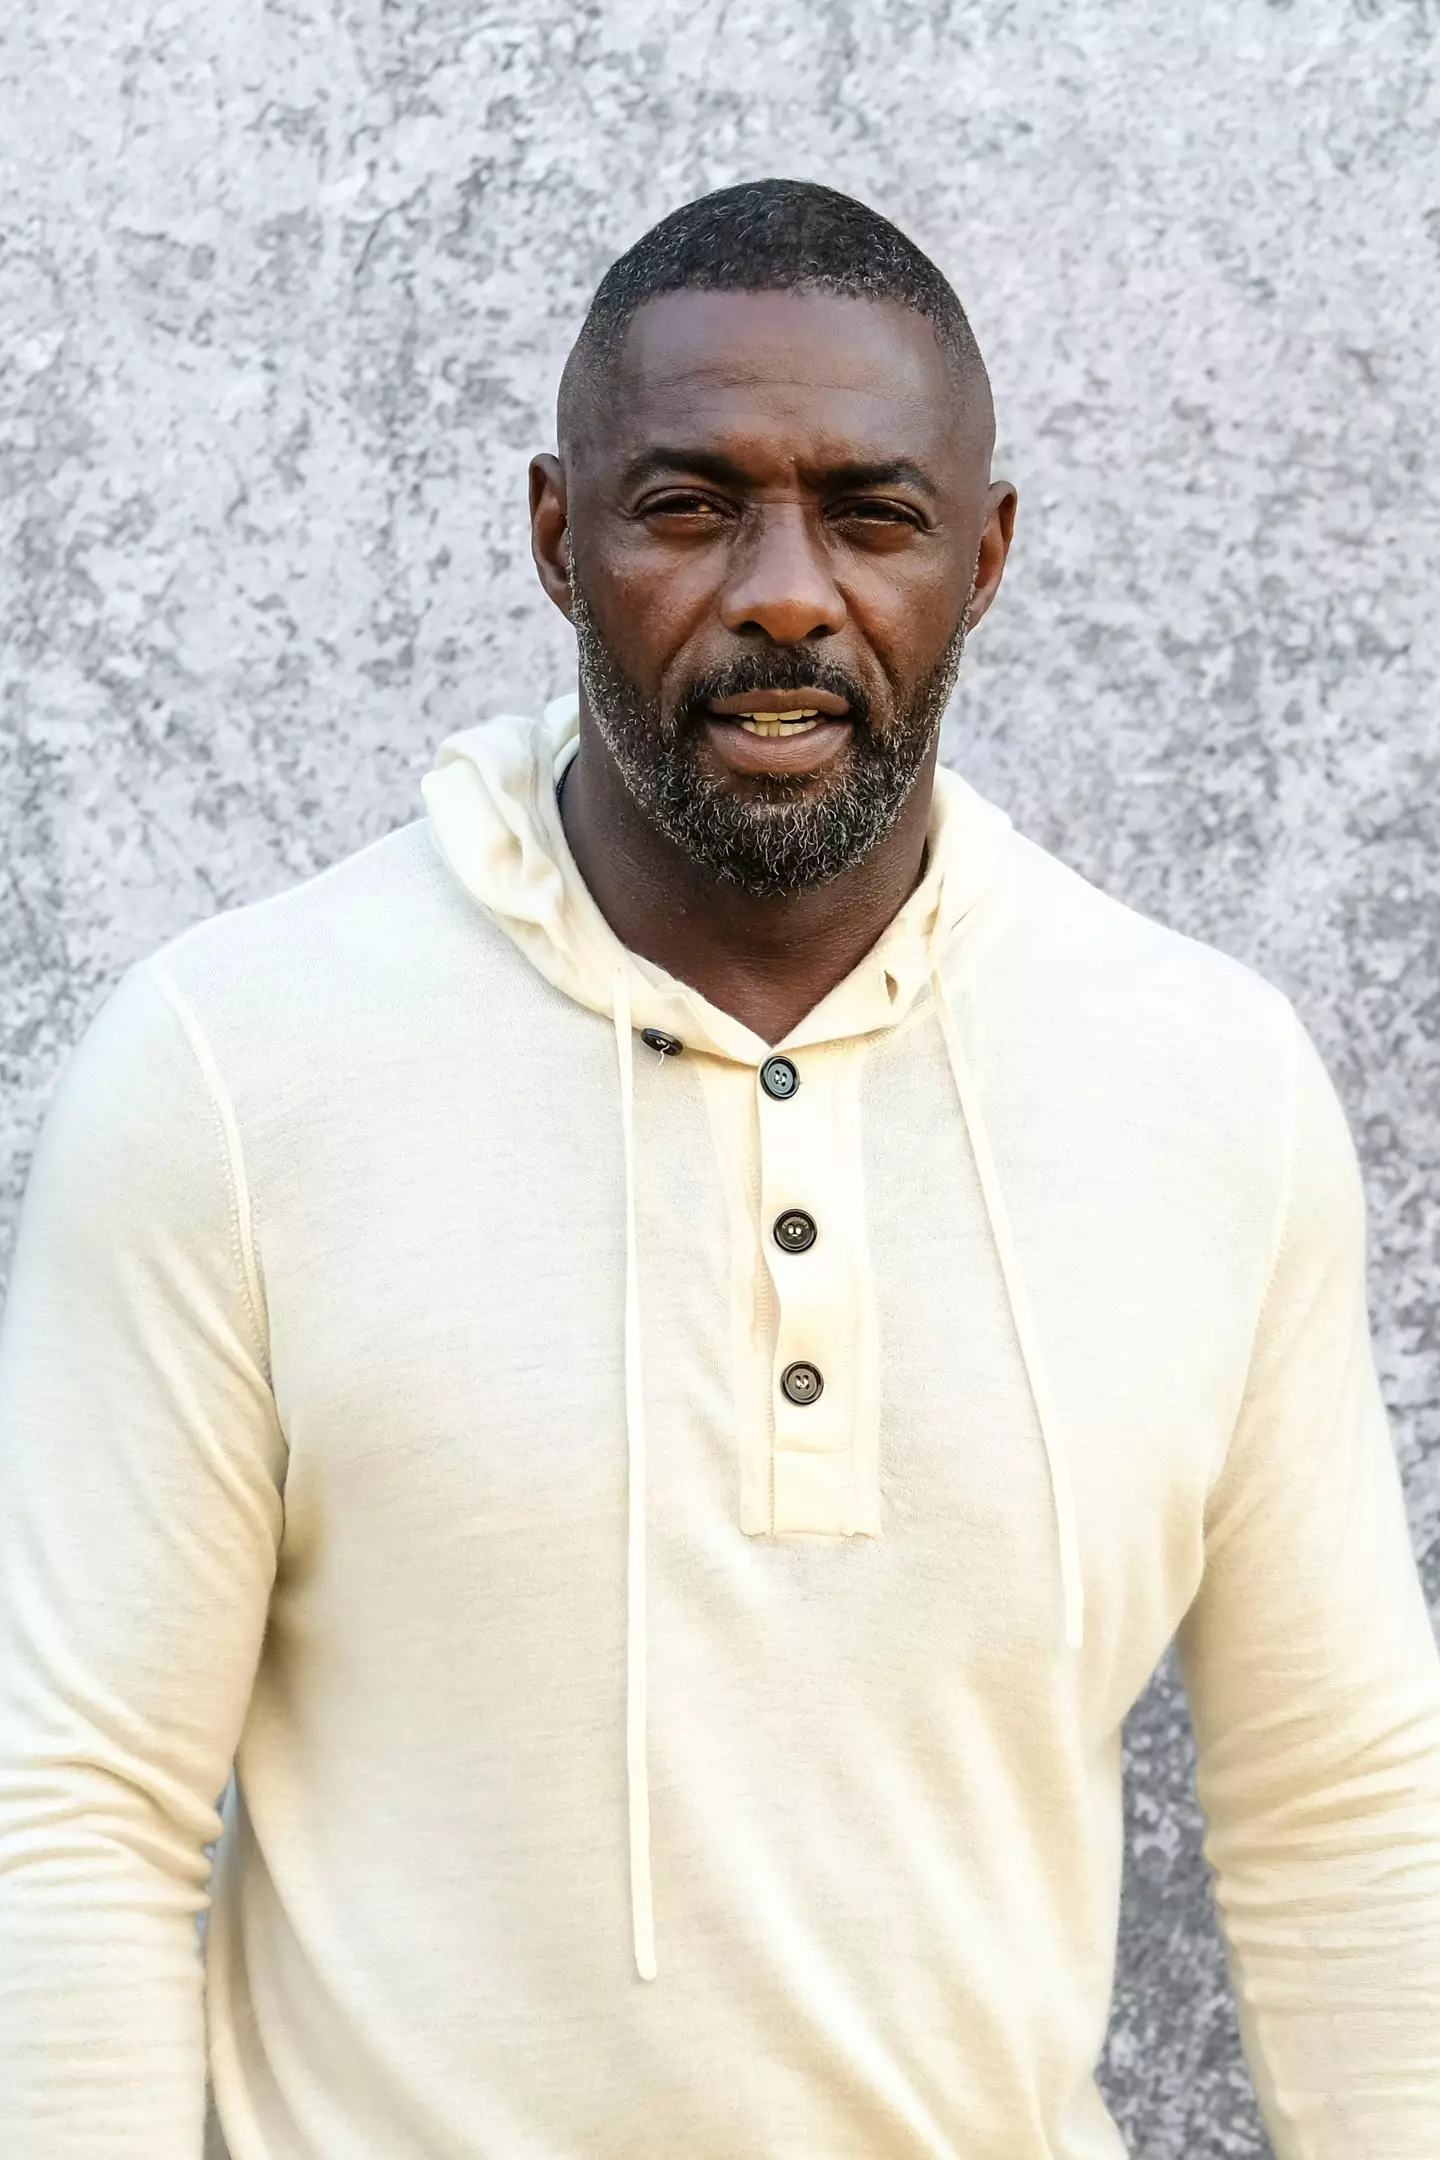 Idris Elba decided to stop calling himself a Black actor after it put him 'in a box'.